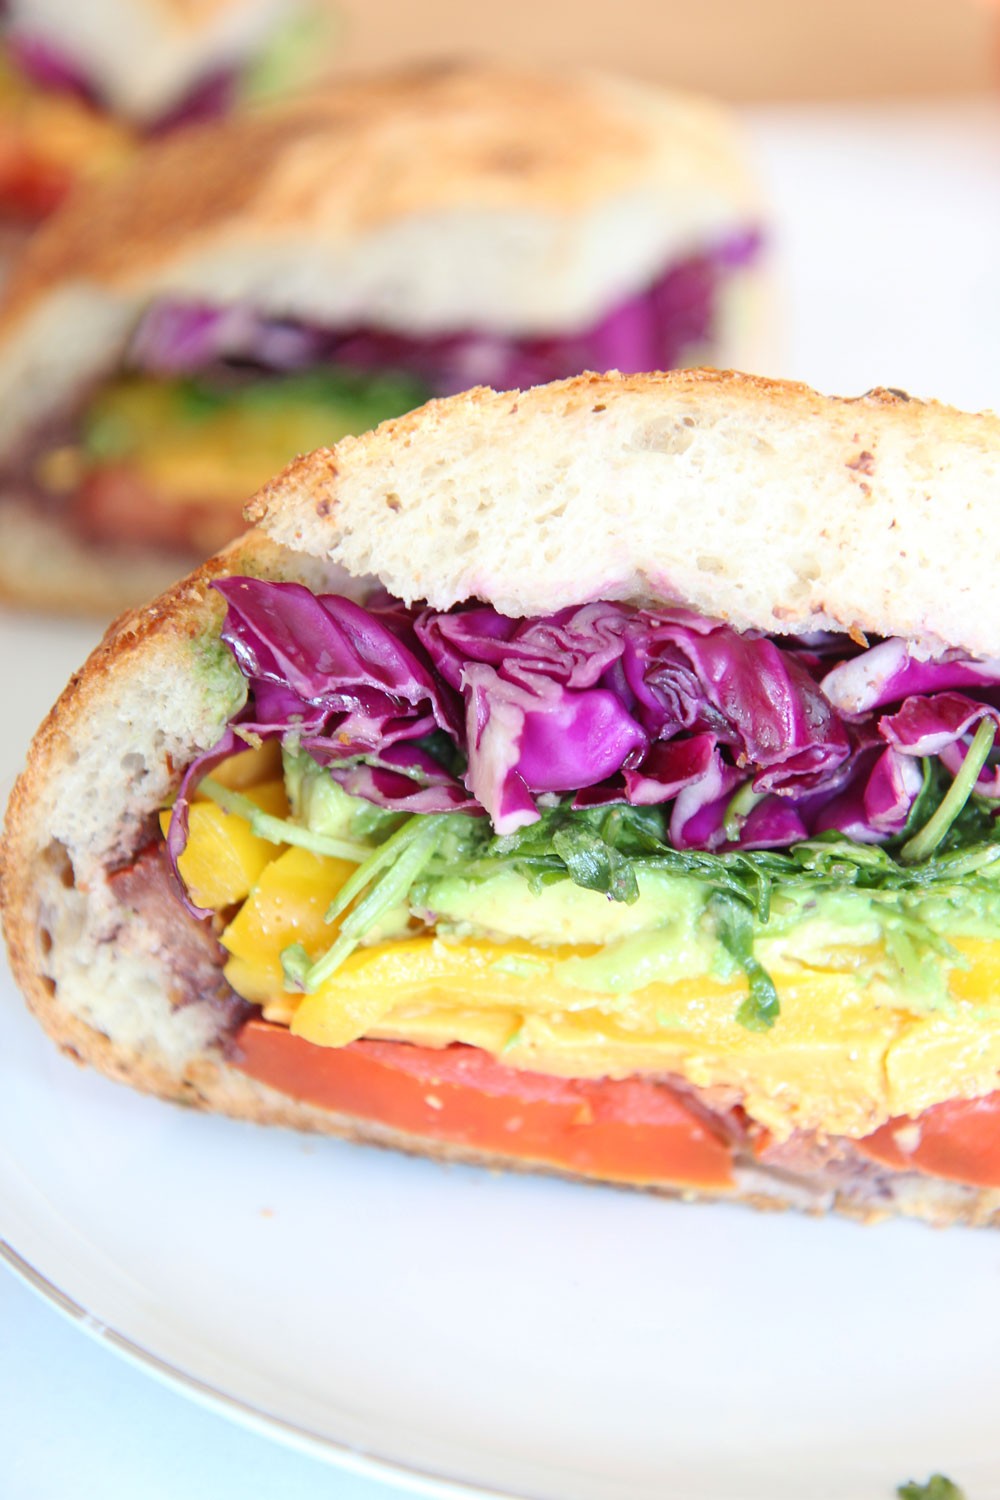 Rainbow Veggie Sandwich with Apple Cider Vinaigrette Recipe. Happy sunshine crunchy rainbow veggie time! This is a great easy healthy sandwich with tang bright flavor for a crowd. Grab yellow peppers, tomatoes, avocado, arugula, cheddar, and cabbage. Then mix apple cider vinaigrette and you have a perfect happy sandwich. #rainbowrecipe #sandwichrecipe